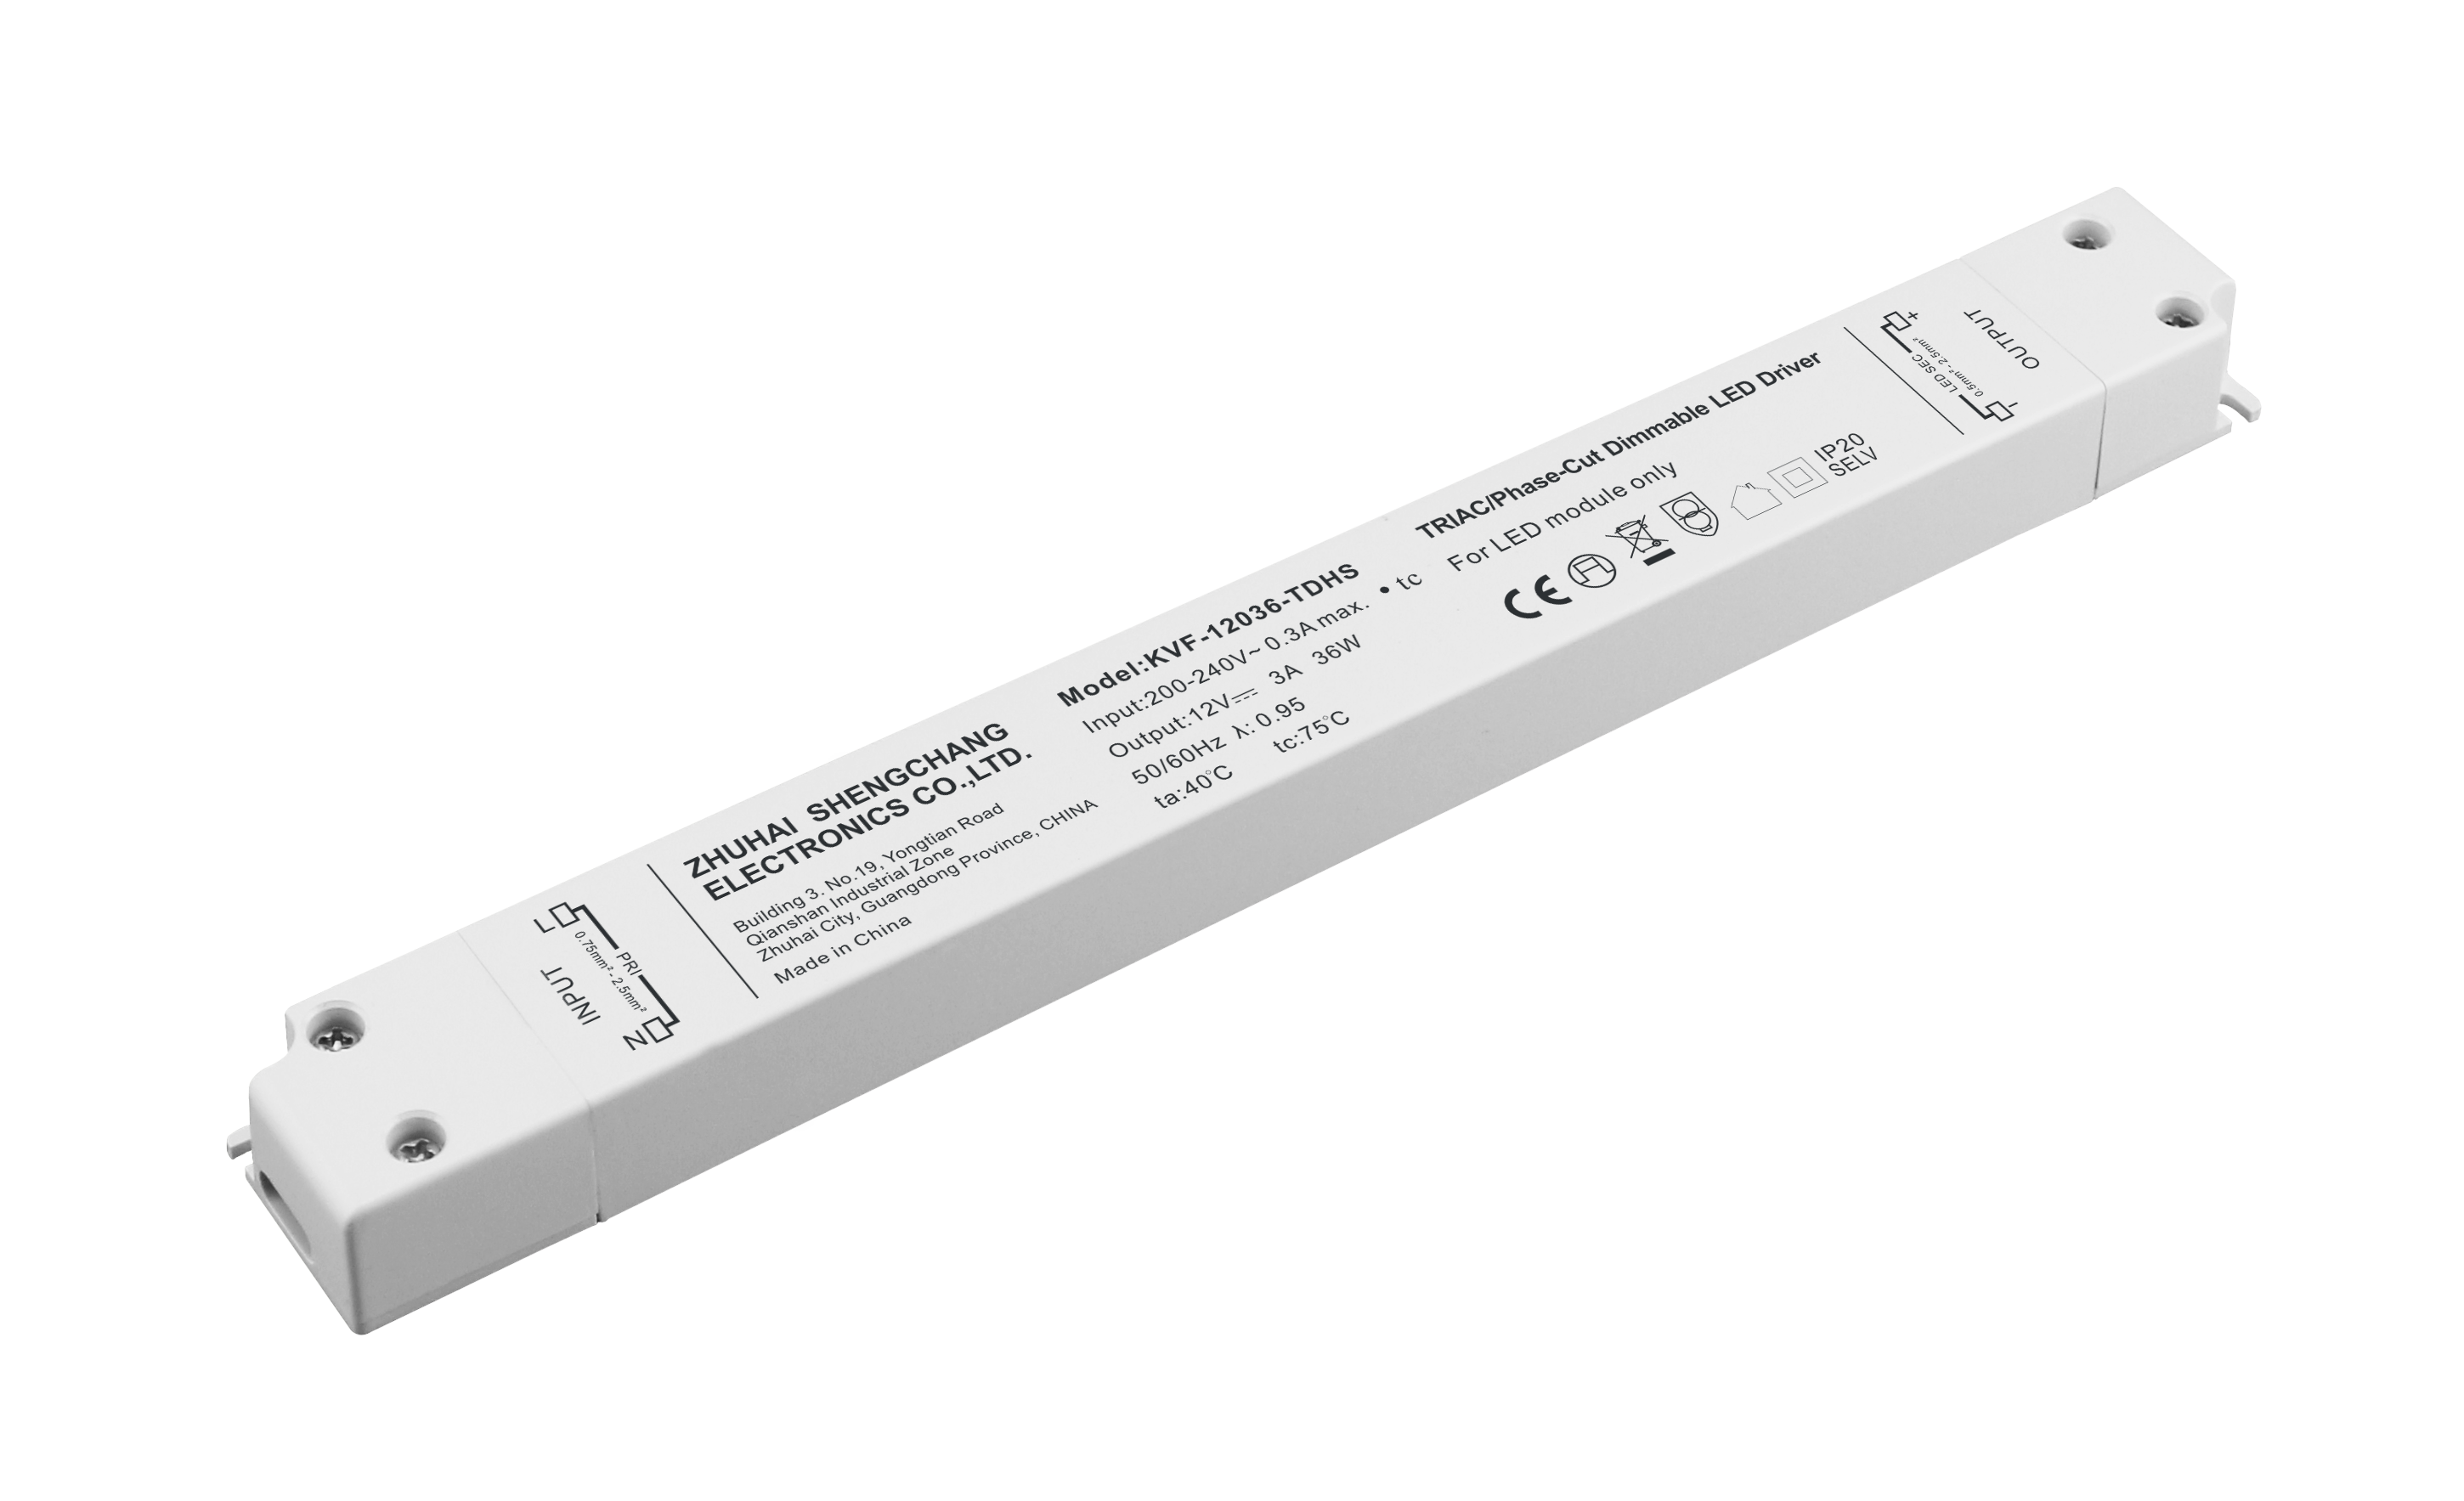 KVF-TDHS Series 36W Constant Voltage Triac Dimmable LED driver